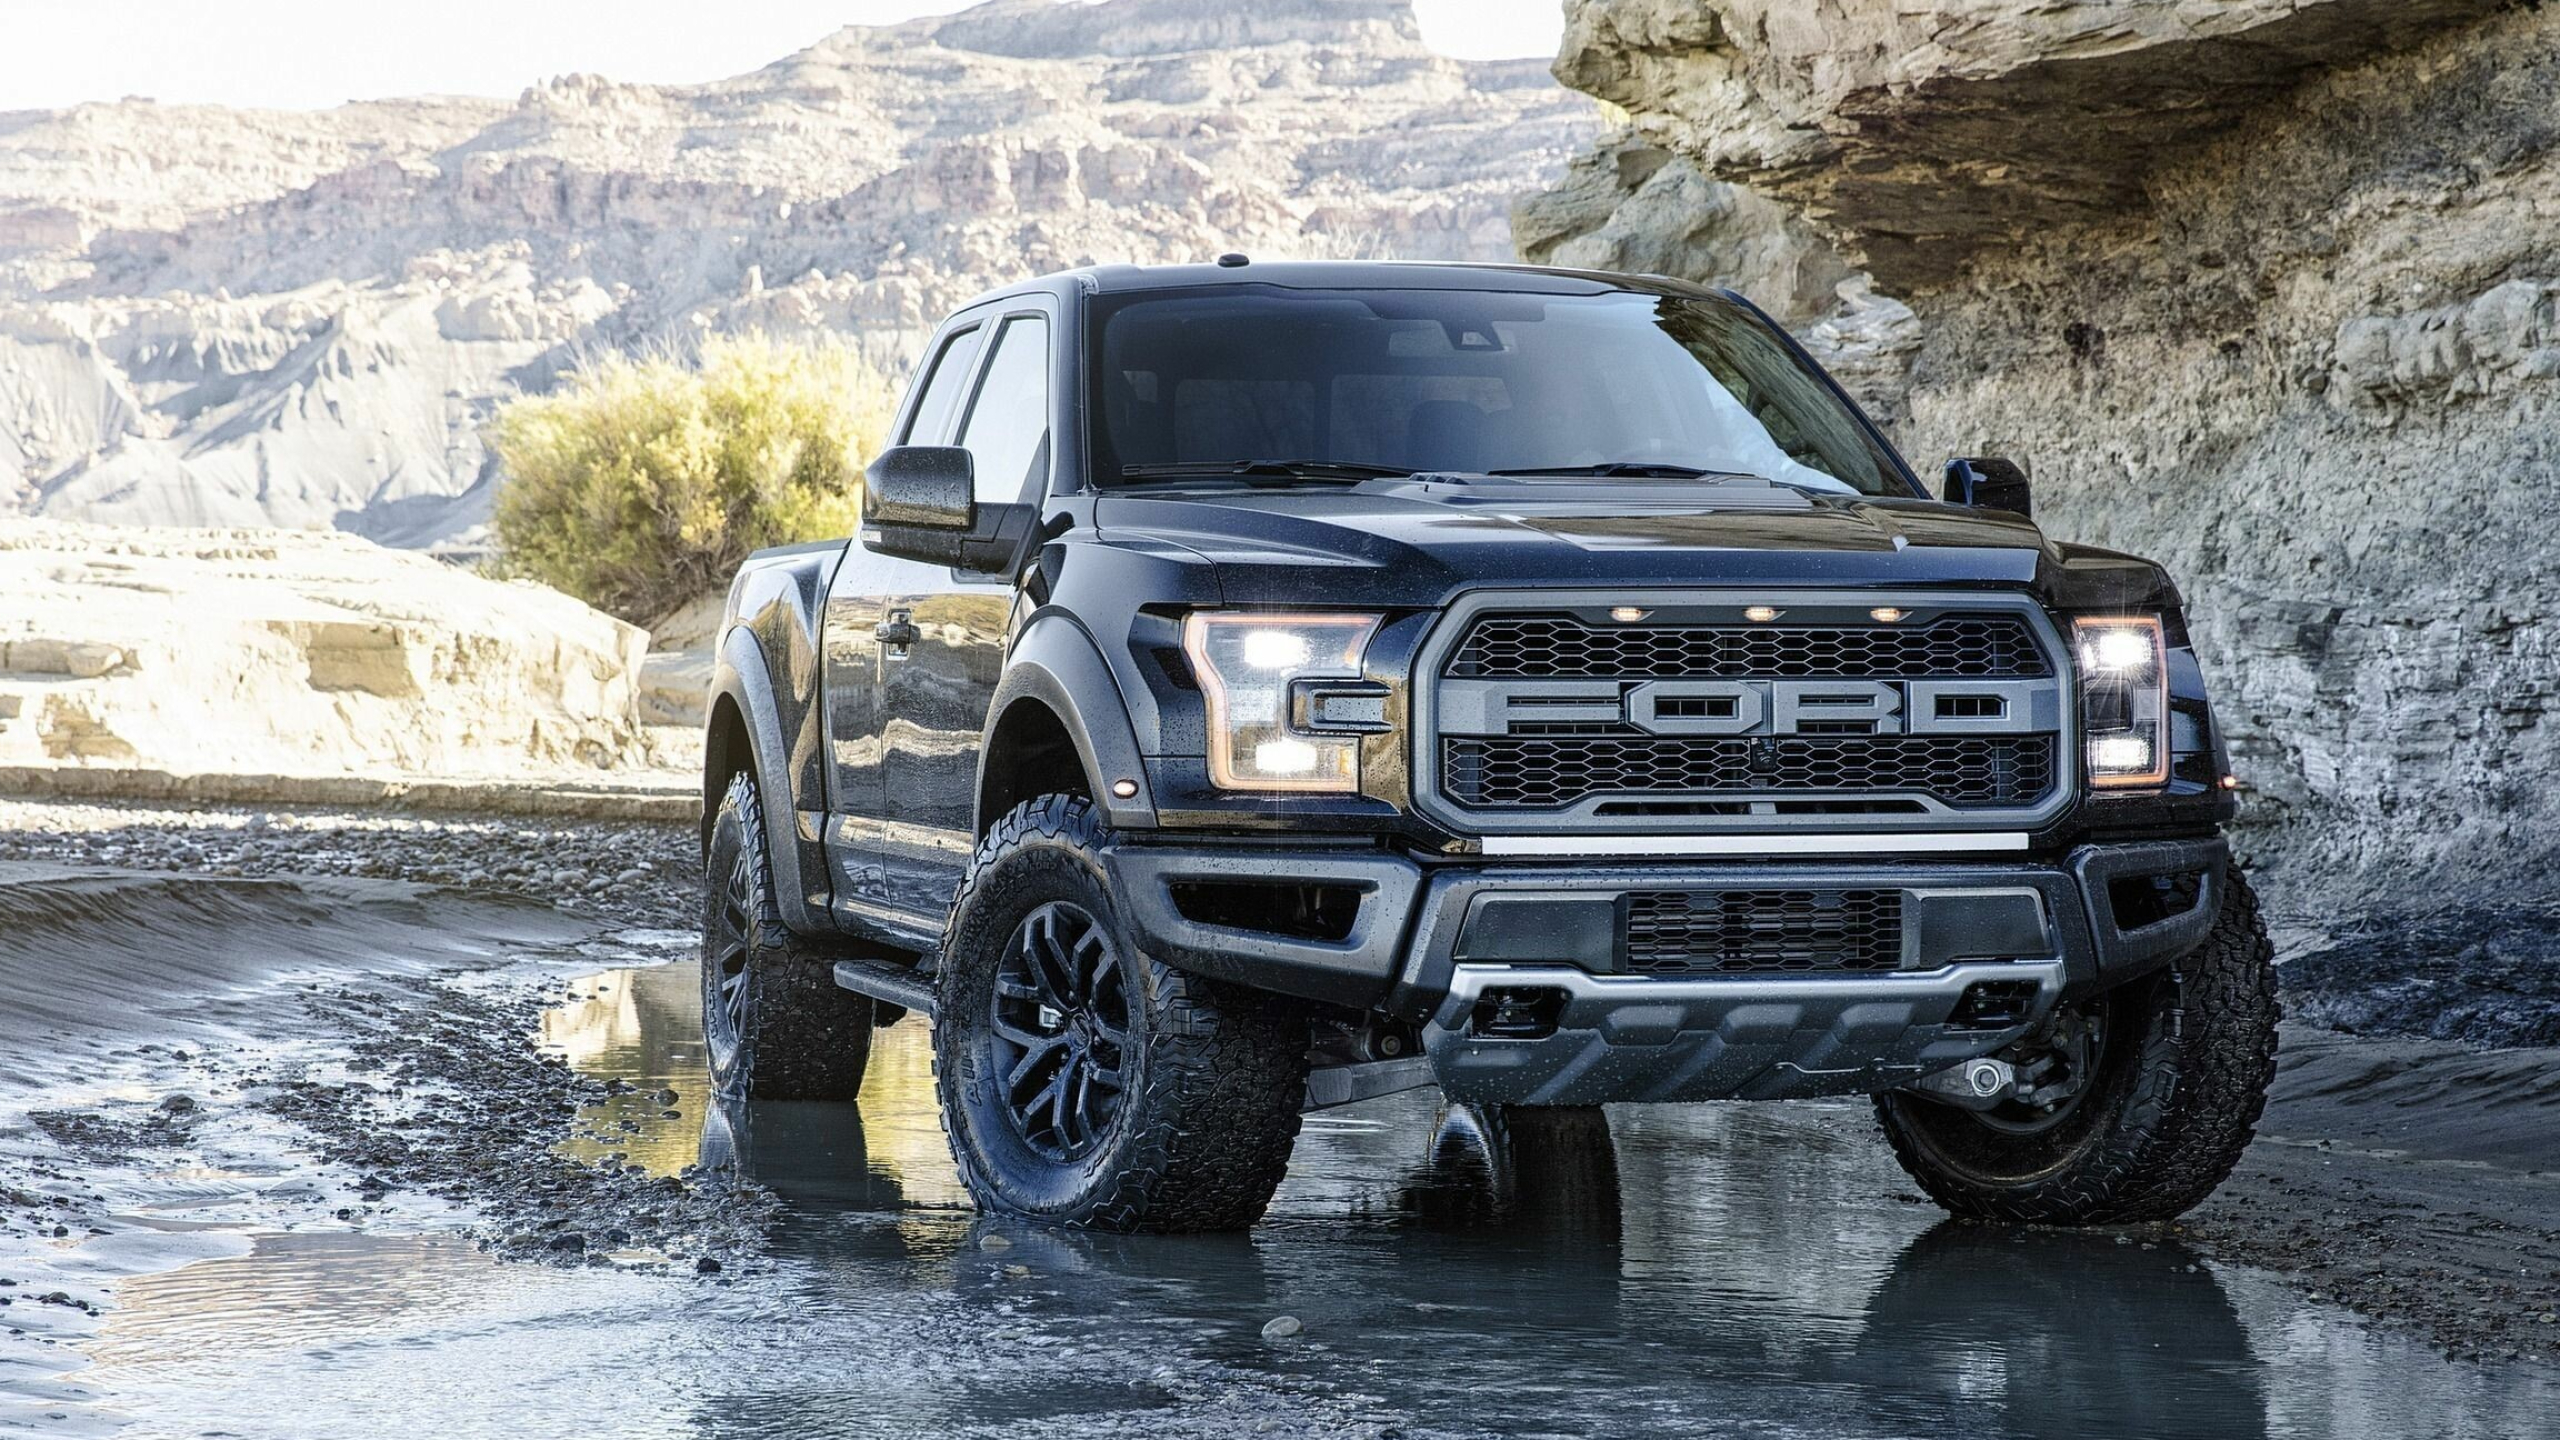 Ford: The second-largest U.S.-based automaker, behind only General Motors. 2560x1440 HD Wallpaper.